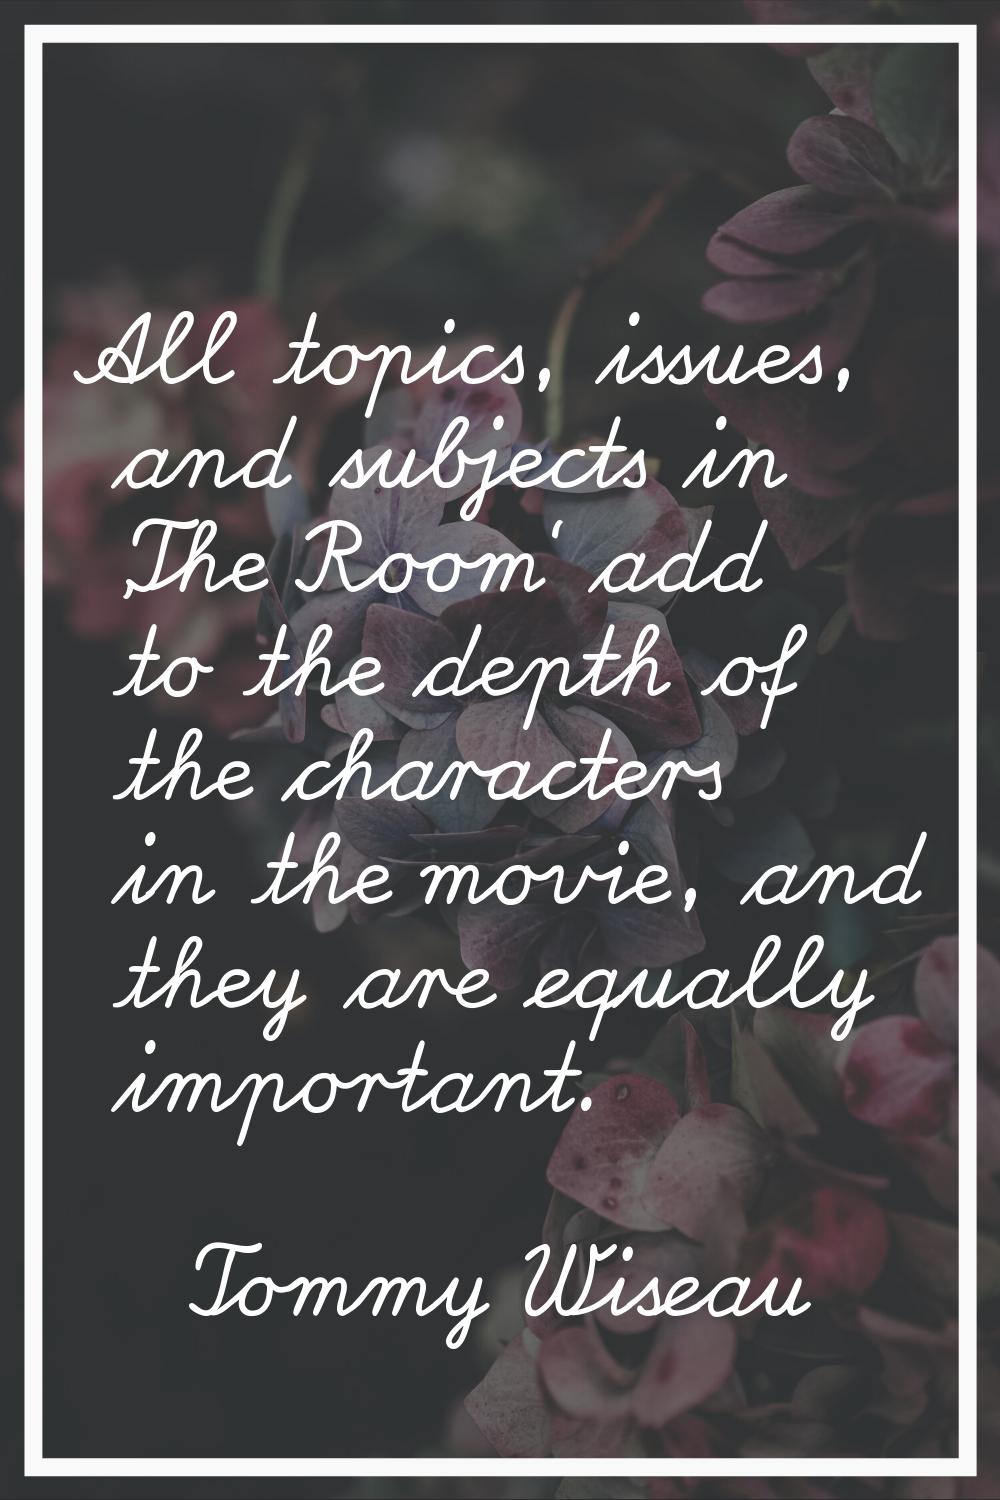 All topics, issues, and subjects in 'The Room' add to the depth of the characters in the movie, and